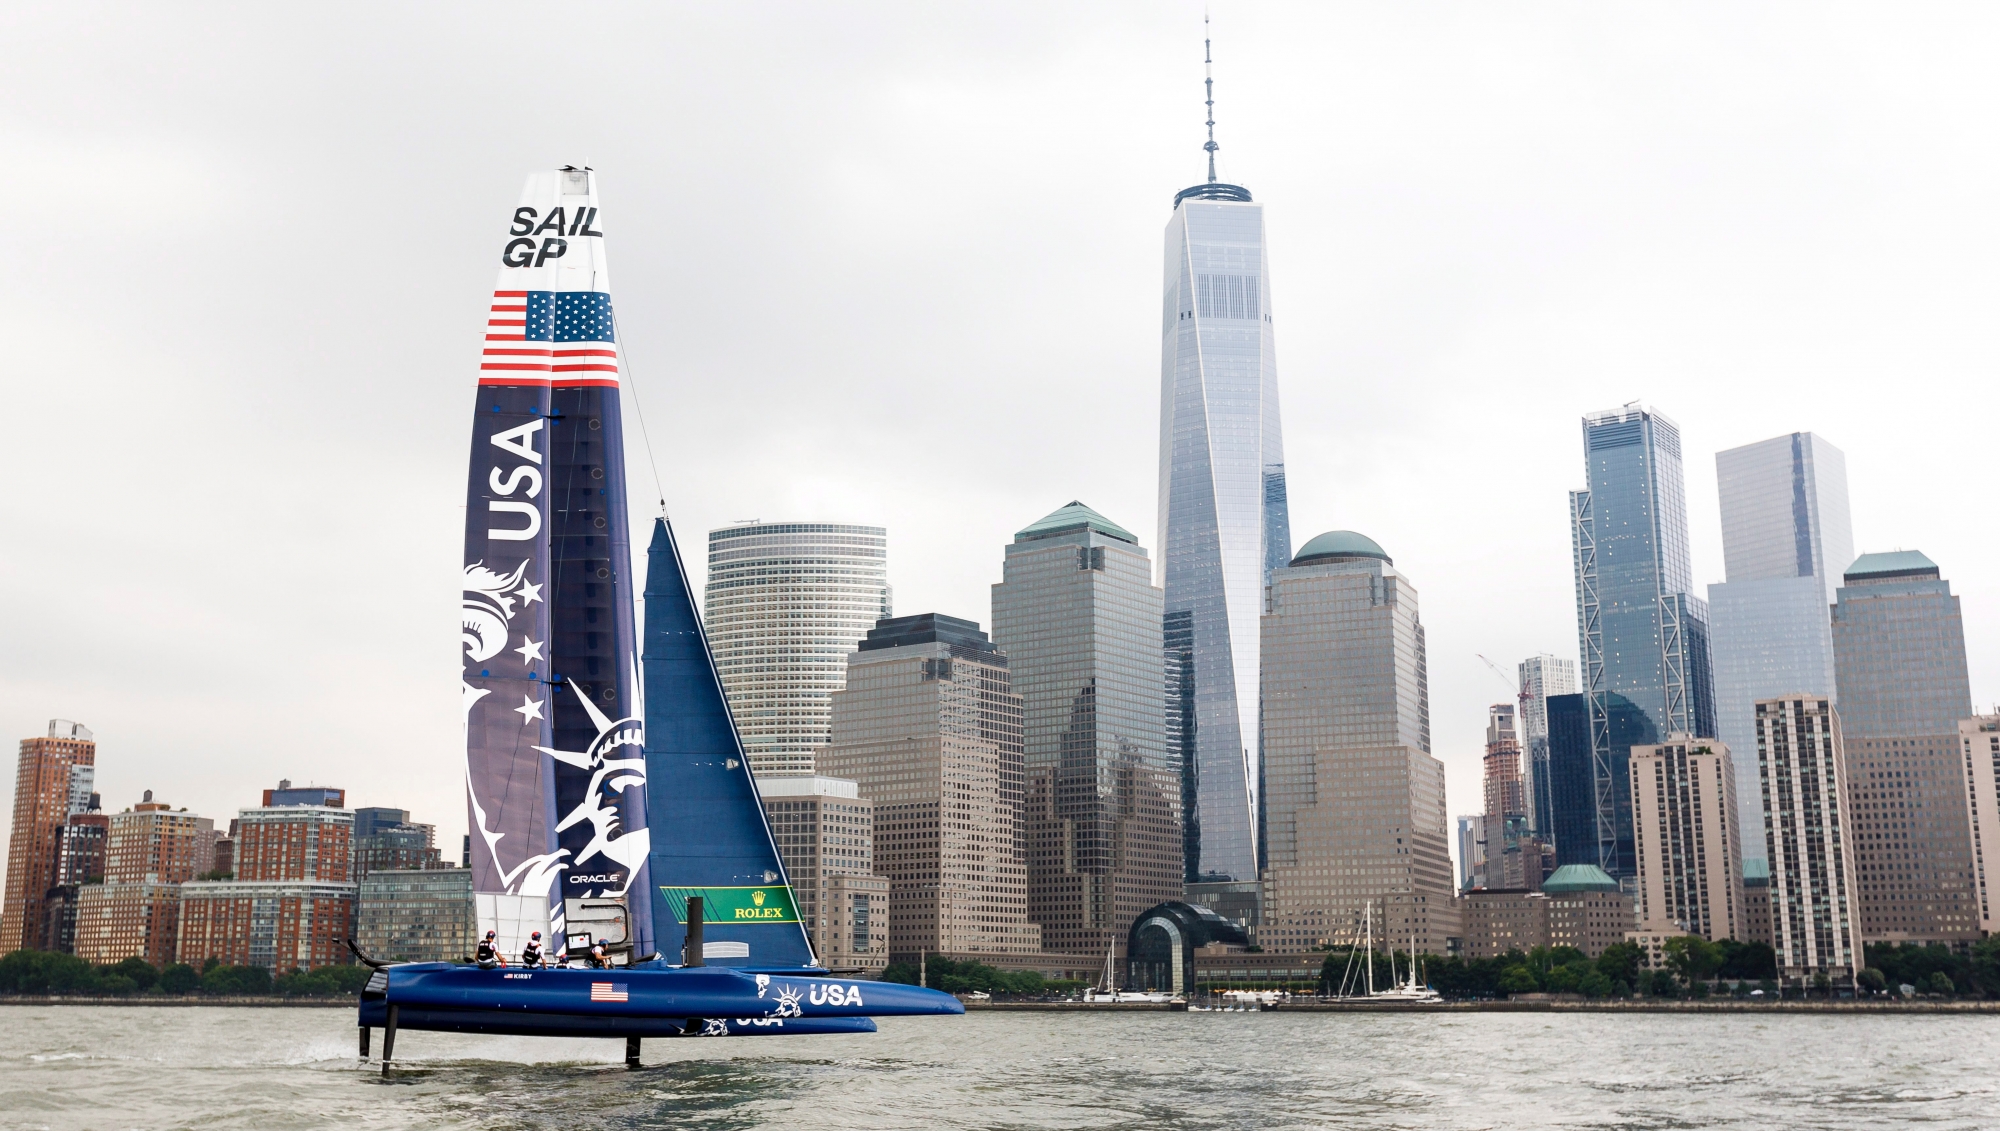 epa07654754 The US SailGP F50 catamaran boat (L) nicknamed 'Lady Liberty' tests the waters in New York Harbor as part of a preview of this week's New York SailGP Race in New York, New York, USA, 17 June 2019. The race, being held on 21 and 22 June, is part of a global competition of sailing teams from six countries using identical catamarans.  EPA/JUSTIN LANE USA NEW YORK SAILGP RACE PREVIEW